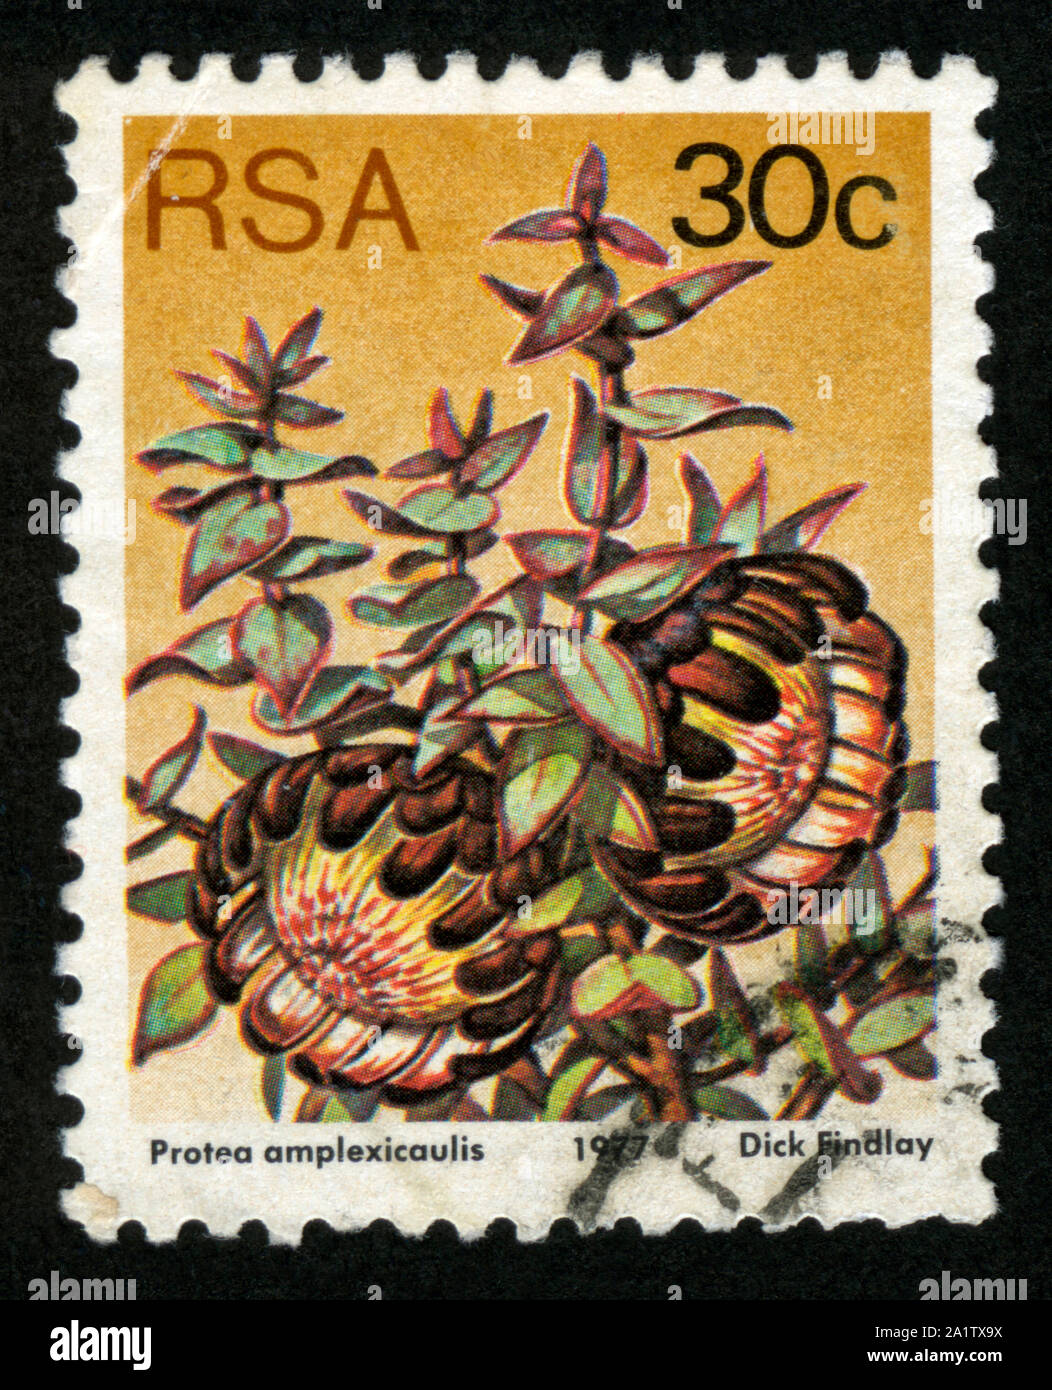 Stamp print in South Africa,flowers,Protea amplexicaulis Stock Photo